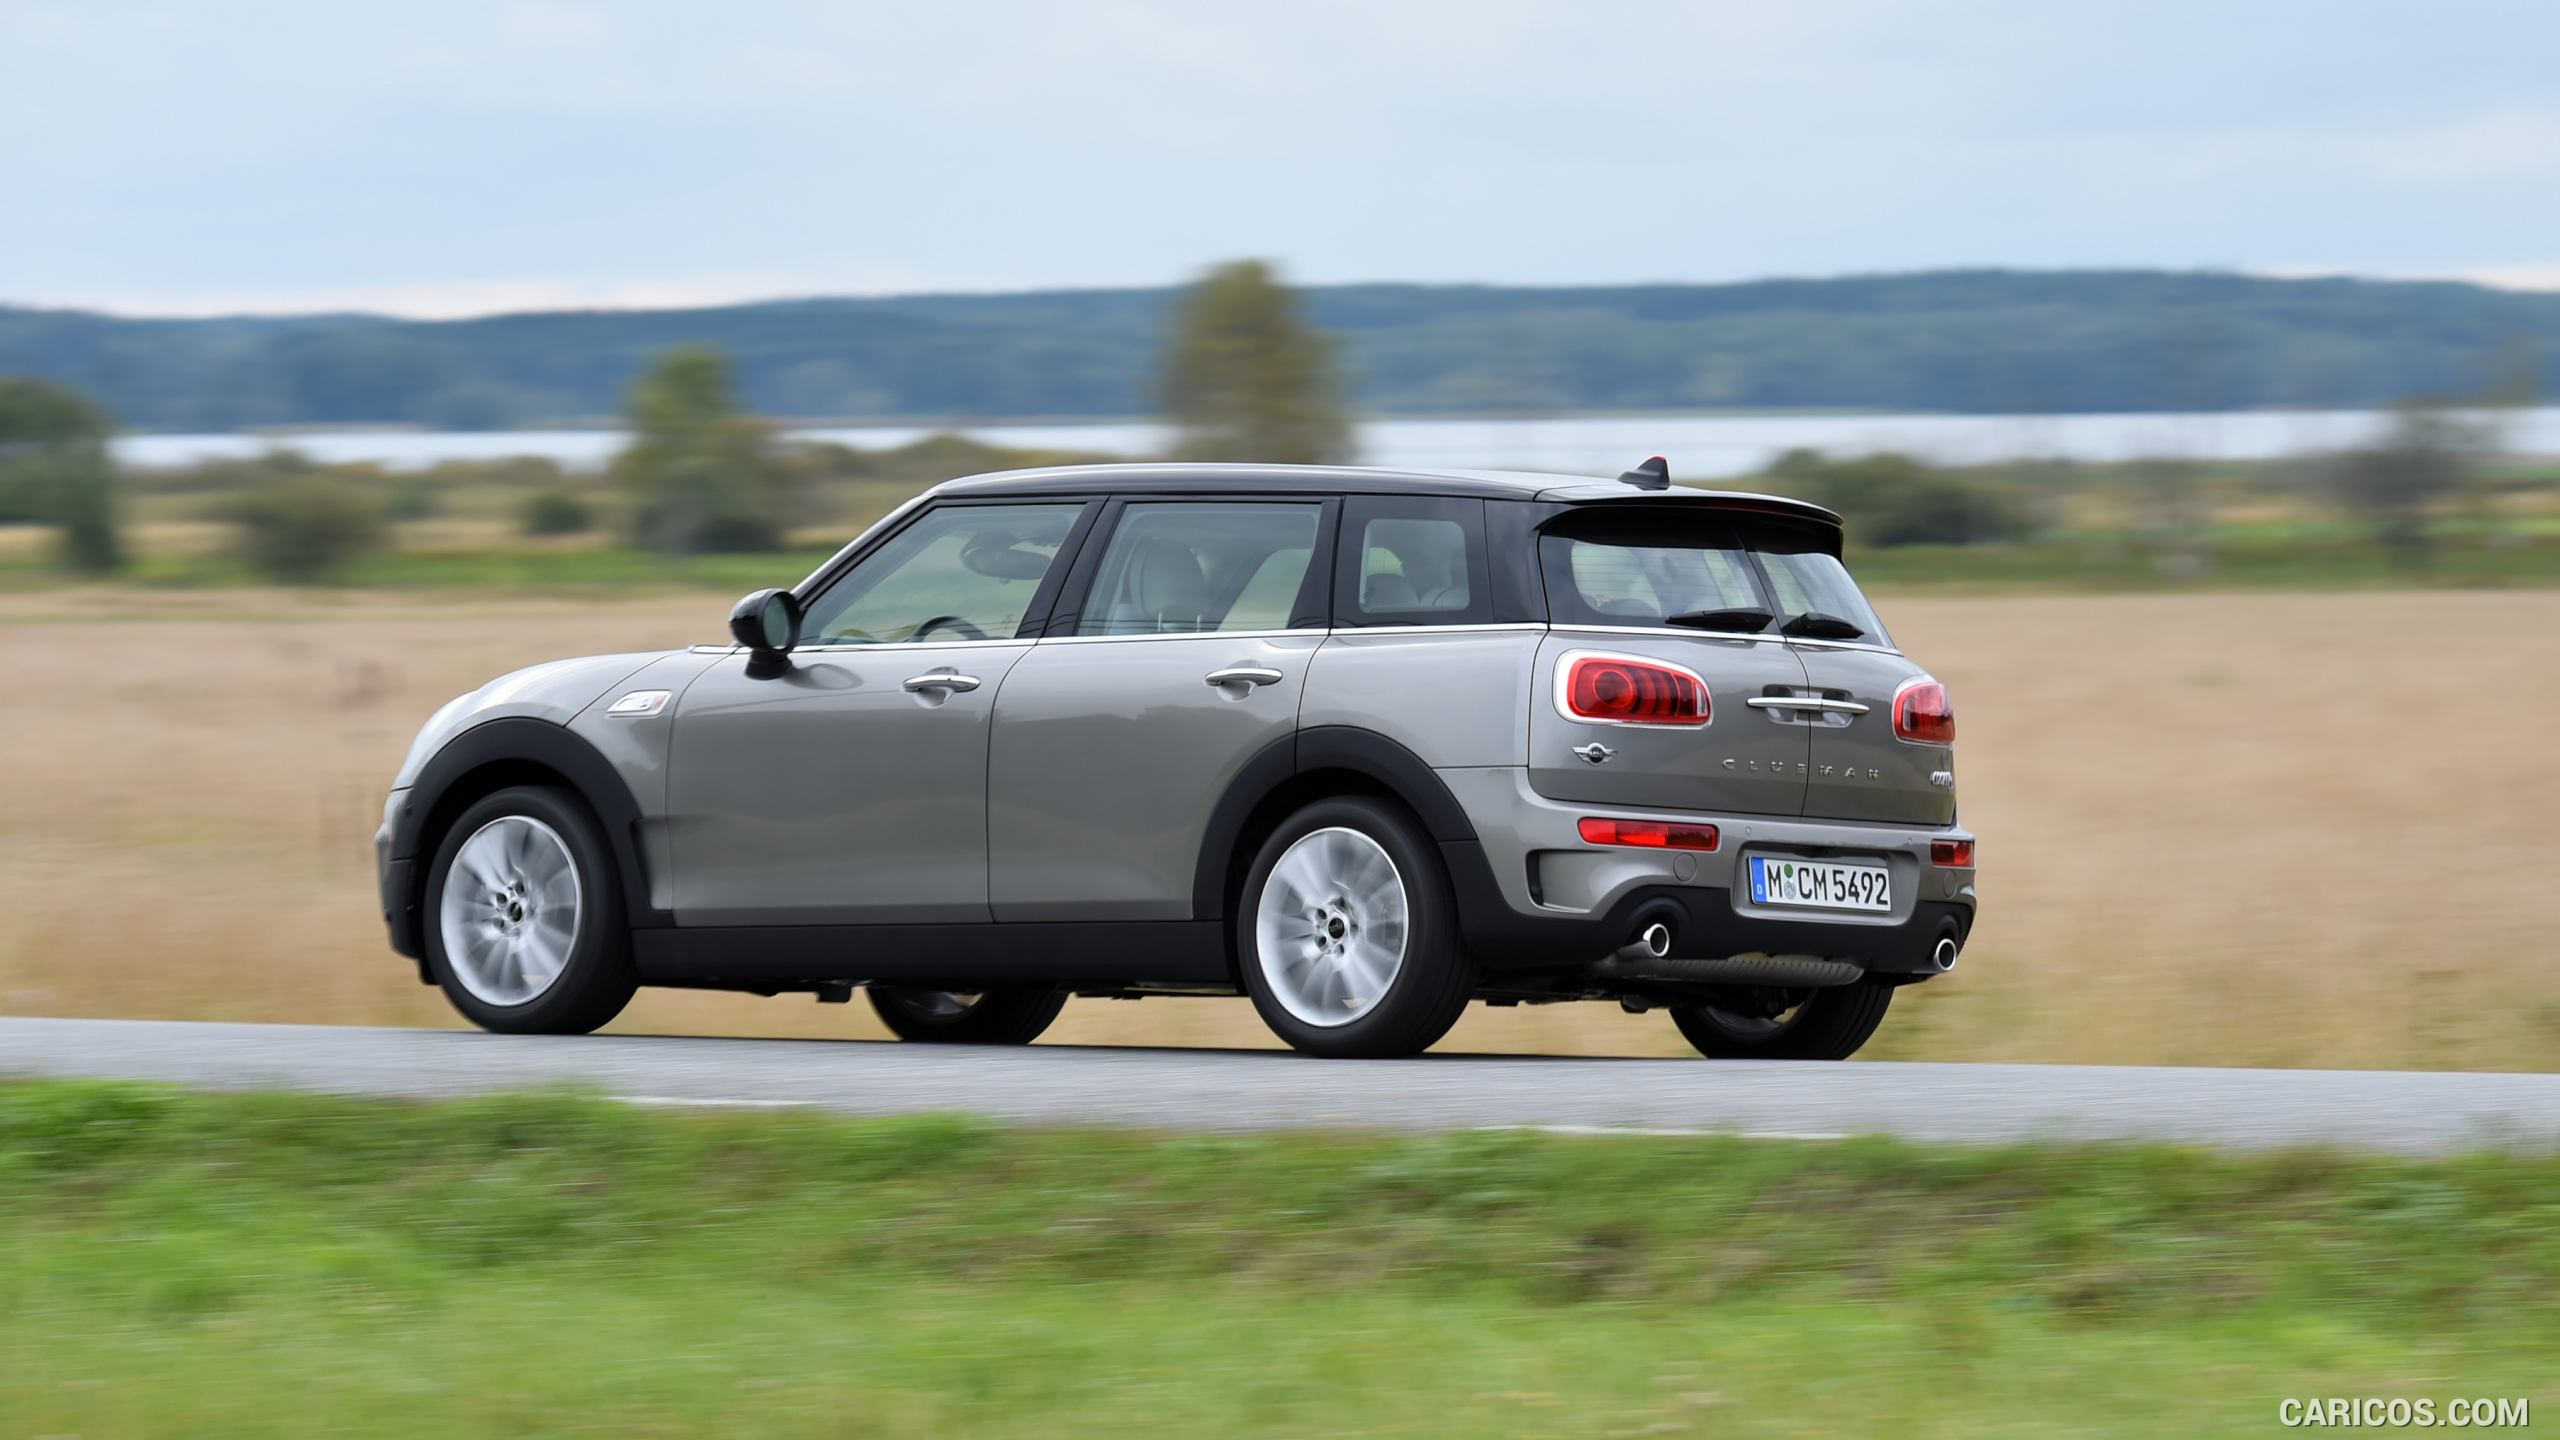 2016 MINI Cooper S Clubman in Metallic Melting Silver - Side, #149 of 380